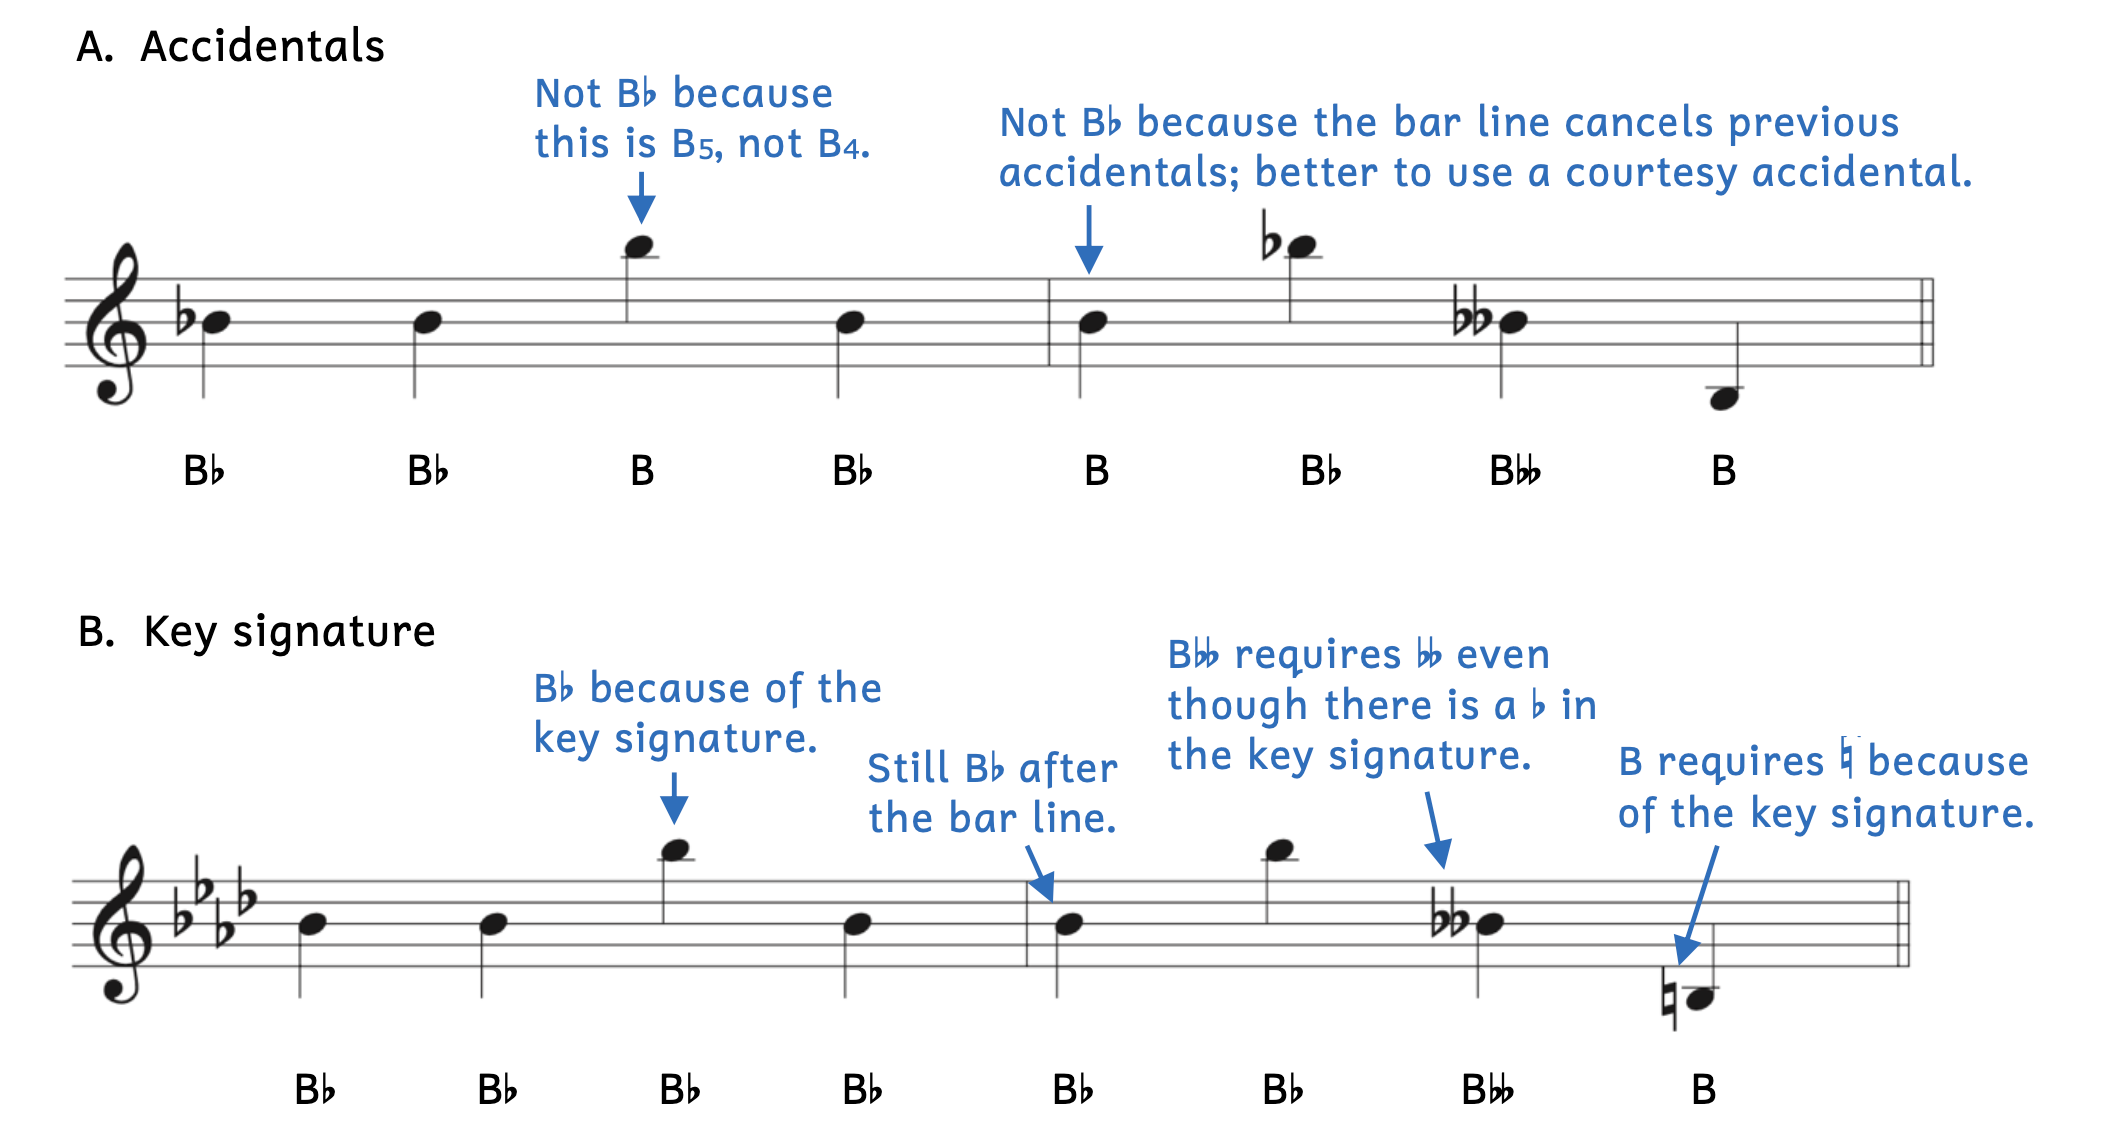 Differences between using accidentals and using a key signature. Example A shows accidentals. The first pitch is B-flat4 with a flat symbol. The third pitch is B5 not B-flat5 because the note is in a different octave. After the bar line, the first note is B4, not B-flat4, because the bar line cancels all accidentals. It would be better to use a courtesy accidental. Example B uses a key signature of four flats. The first pitch is B-flat4 because of the key signature. The third pitch is B-flat5 because of the key signature. After the bar line, the pitch is still B-flat4 because of the bar line. The third pitch after the bar line is B-double flat4 because of the double flat accidental. Even though there is a B-flat in the key signature, a double flat is required to lower B-flat. The last pitch is B-natural3. The natural sign is required because of the key signature.